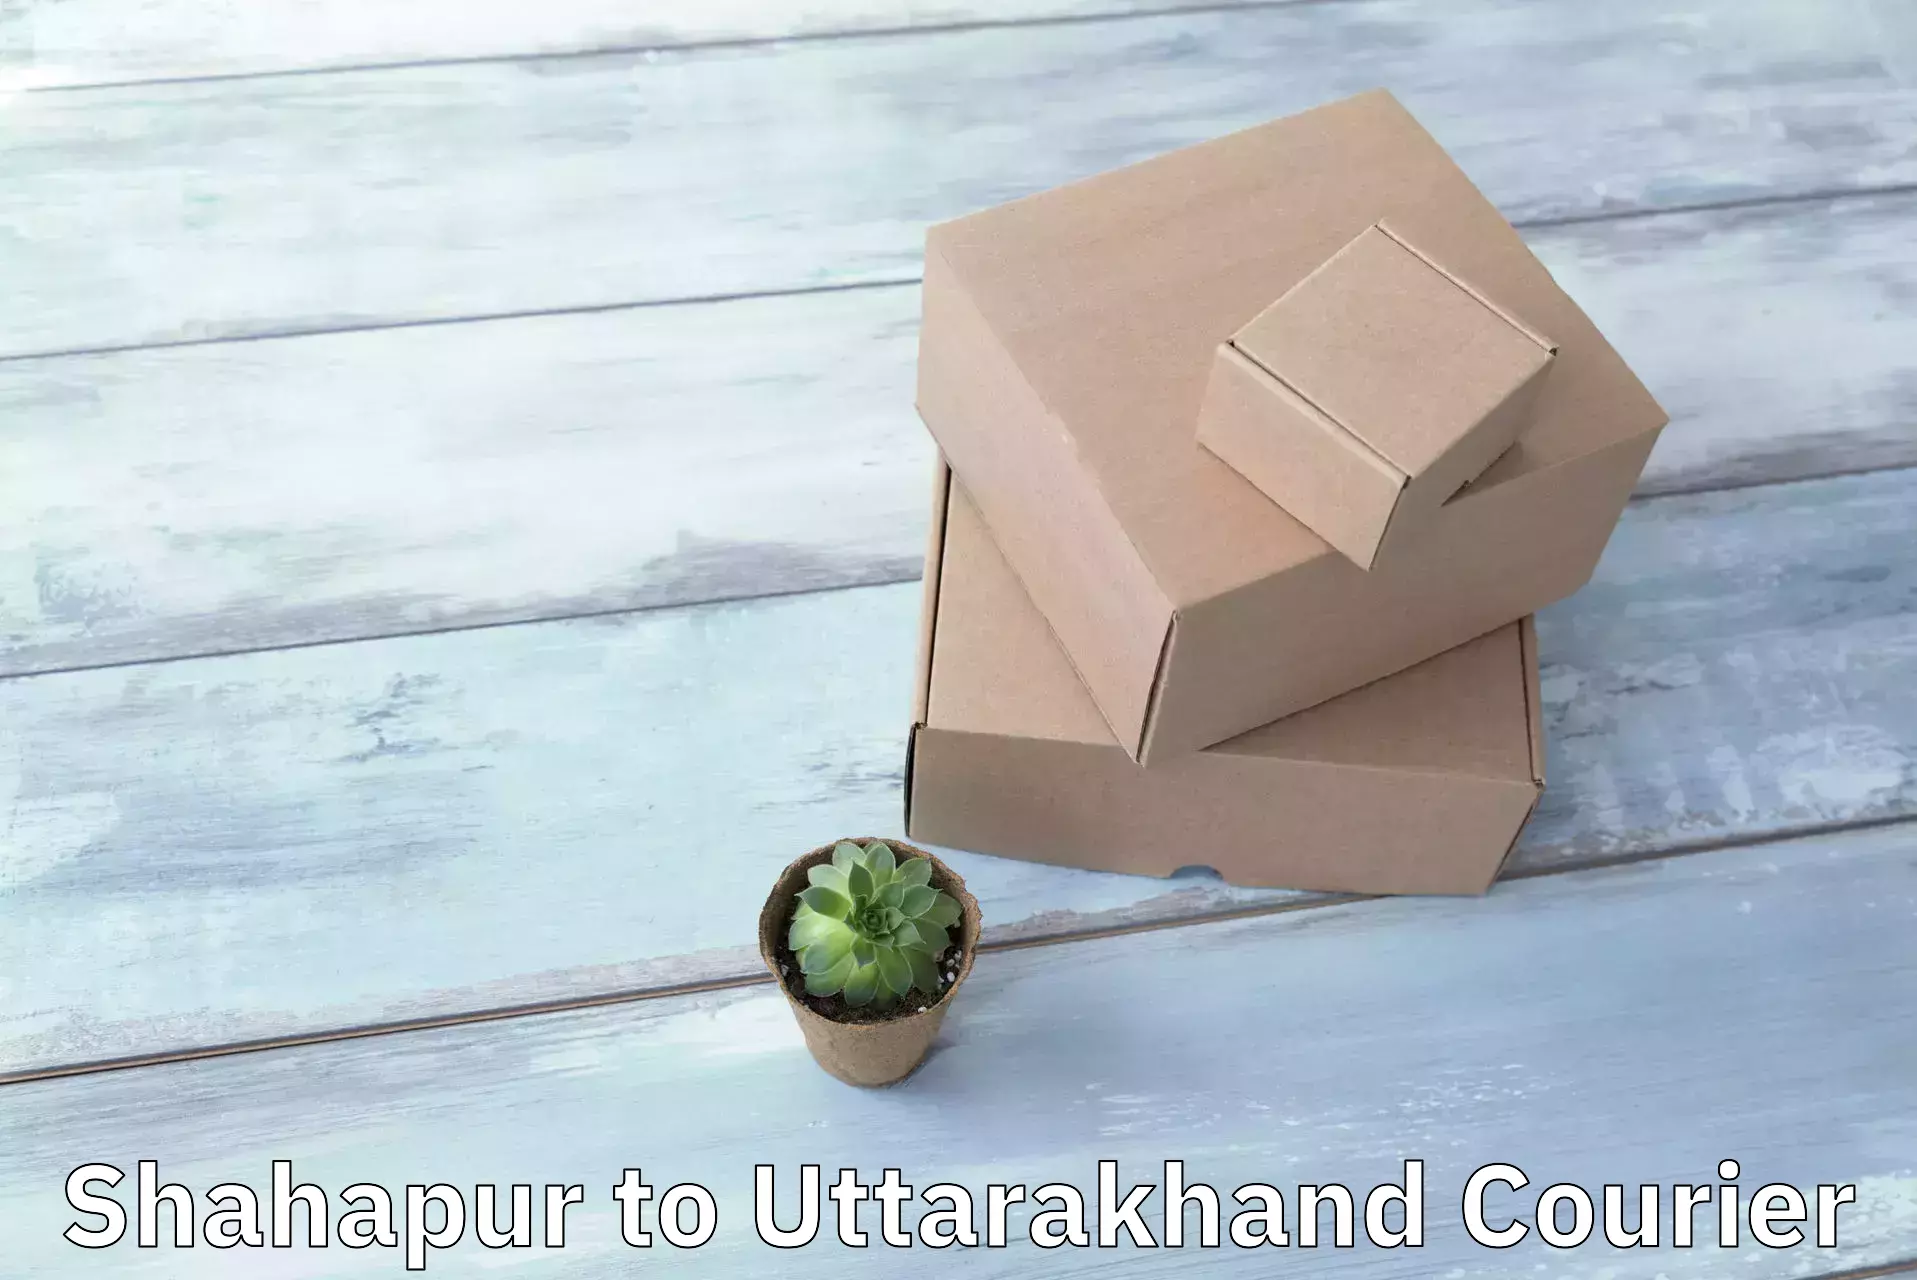 Sustainable courier practices Shahapur to Kotdwara